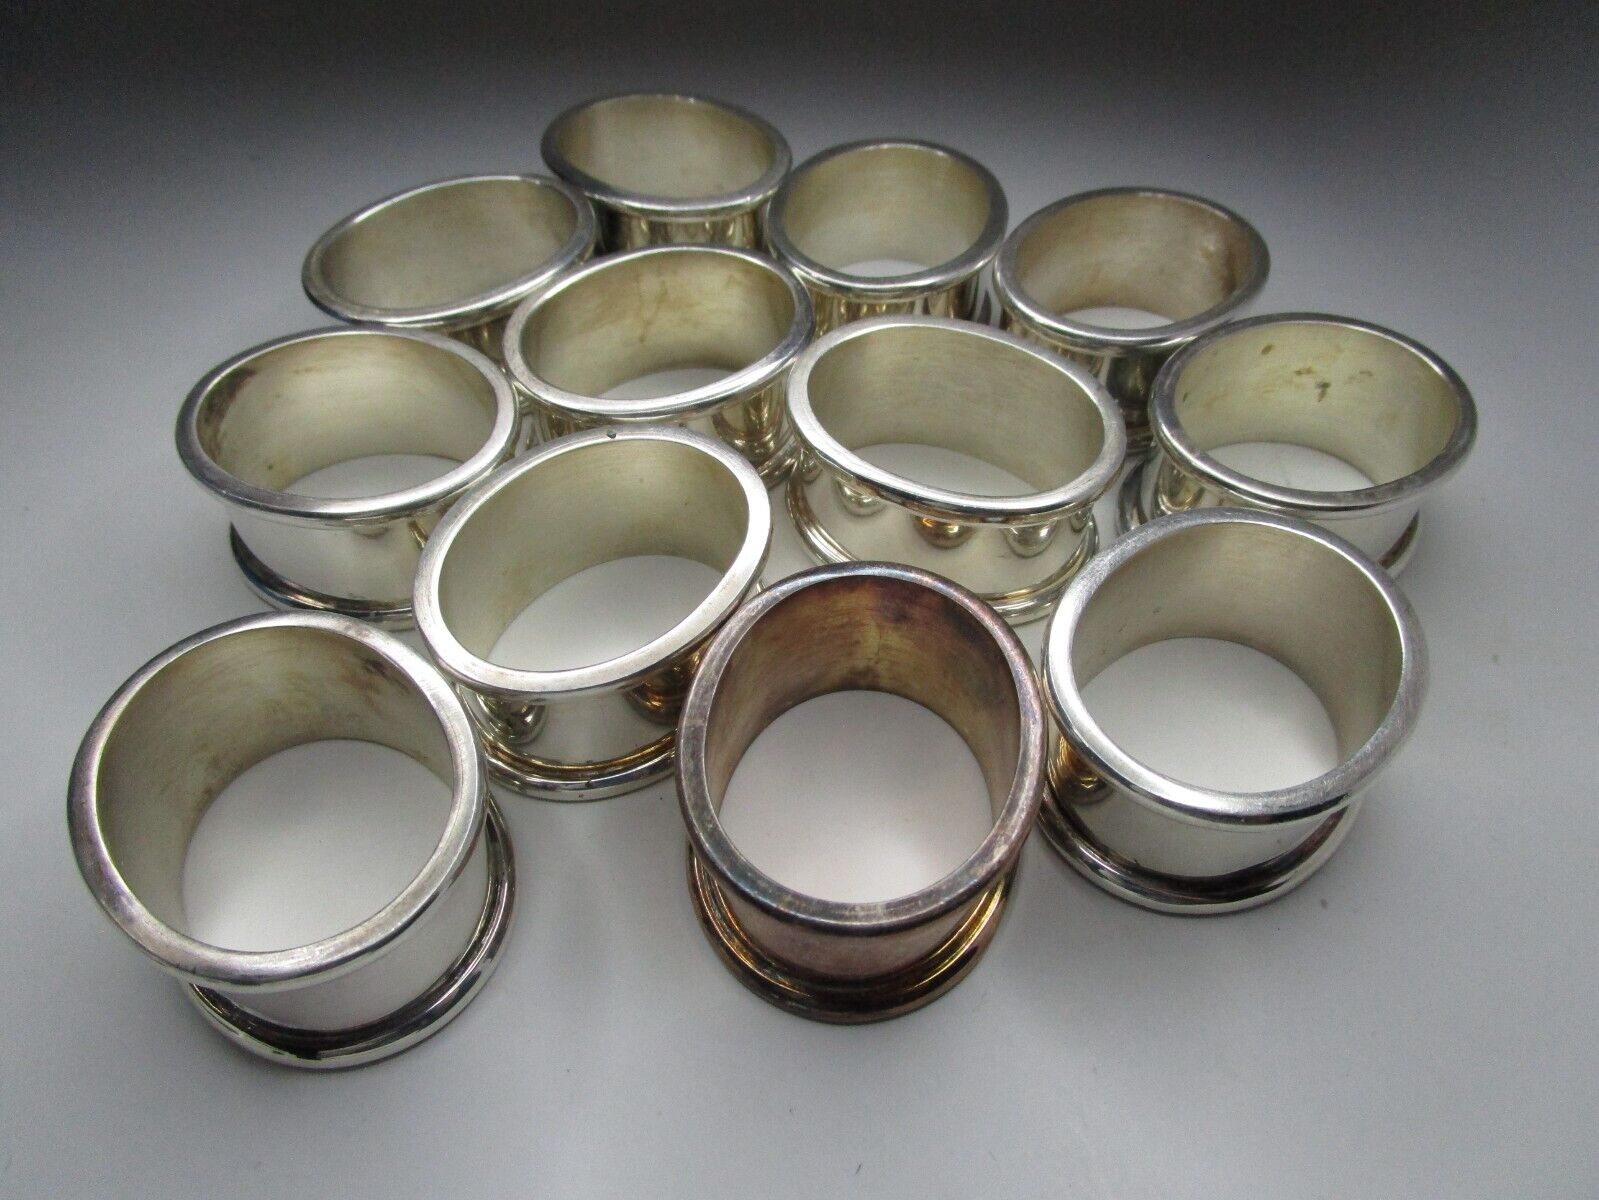 VTG SILVER PLATED OVAL NAPKIN RINGS SET/12 FINE DINING